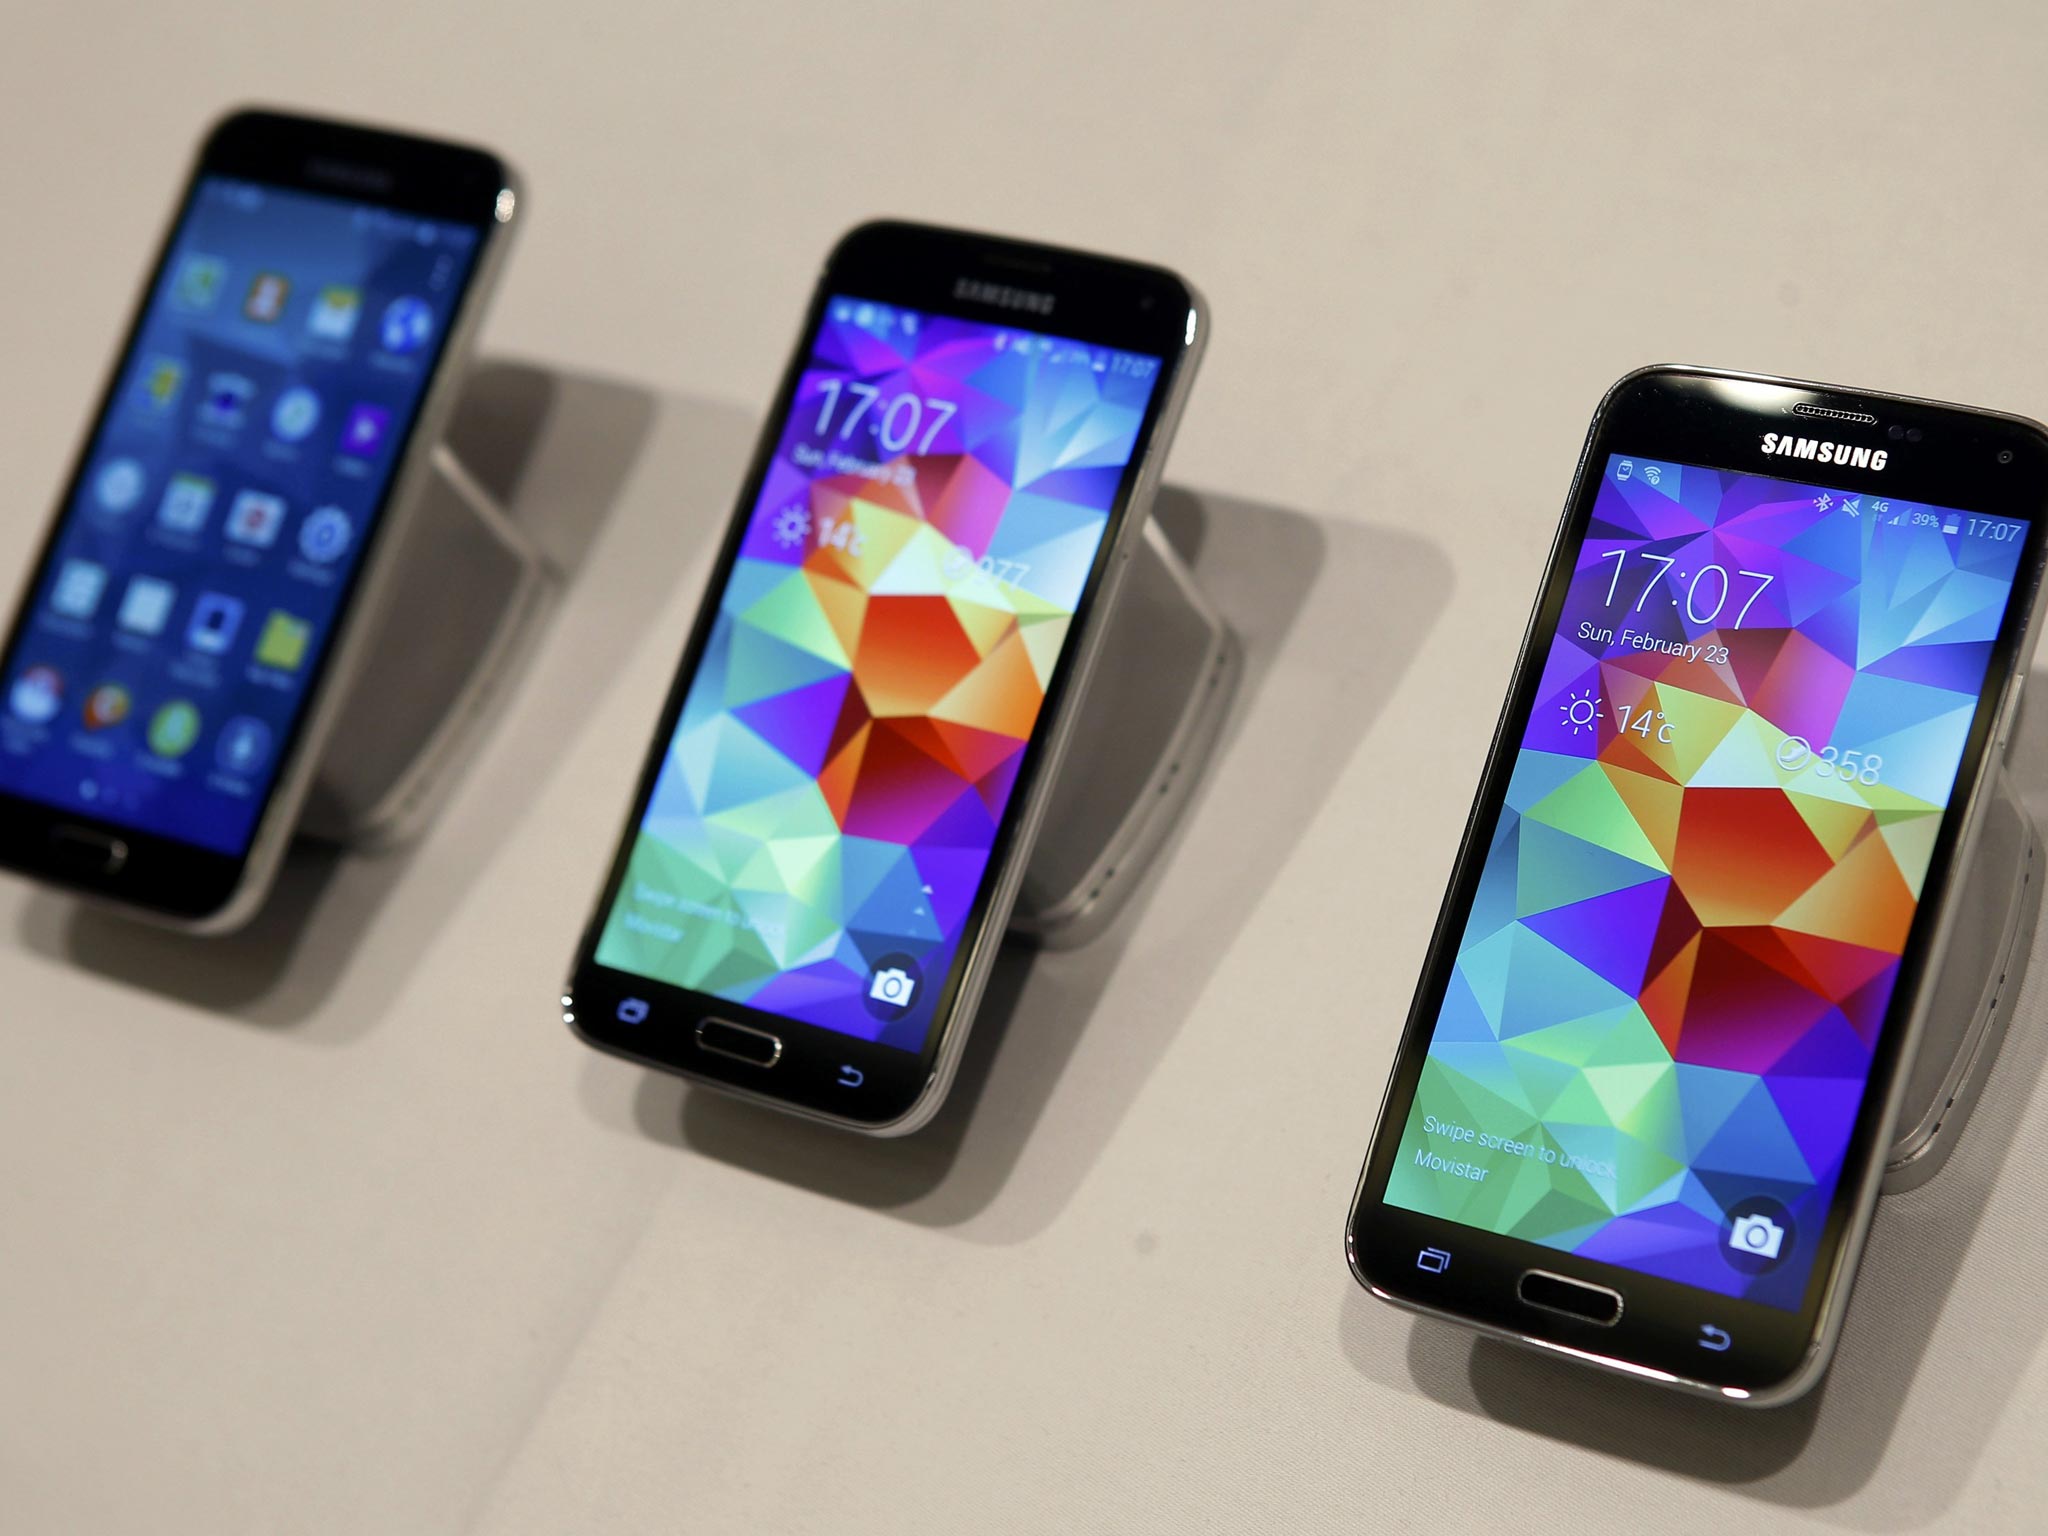 Samsung Galaxy S5 smartphones on display at the Mobile World Congress in Barcelona